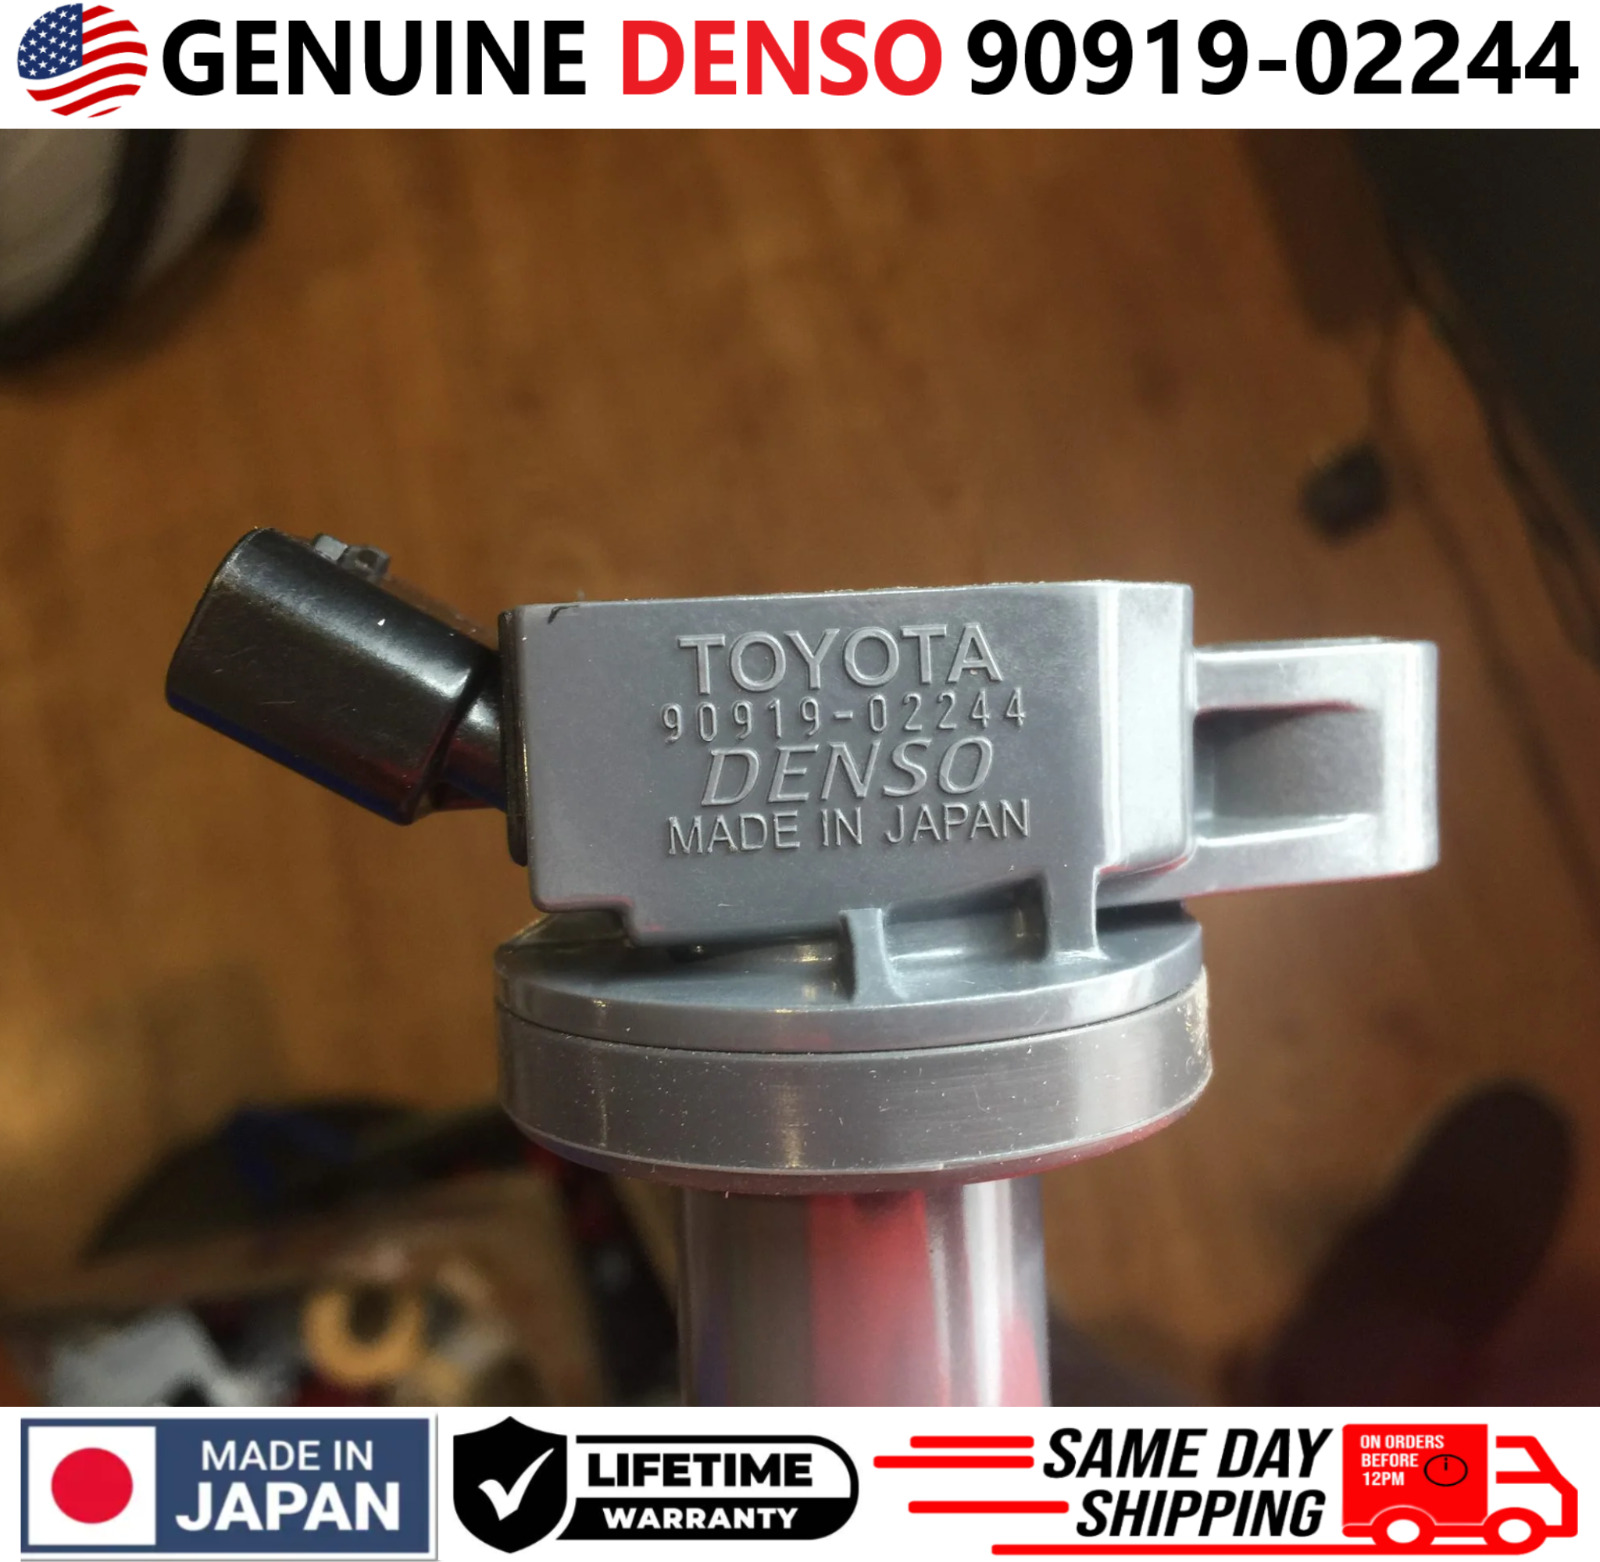 OEM DENSO x1 Ignition Coil For 2001-2012 Toyota, Lexus, Scion I4, 90919-02244